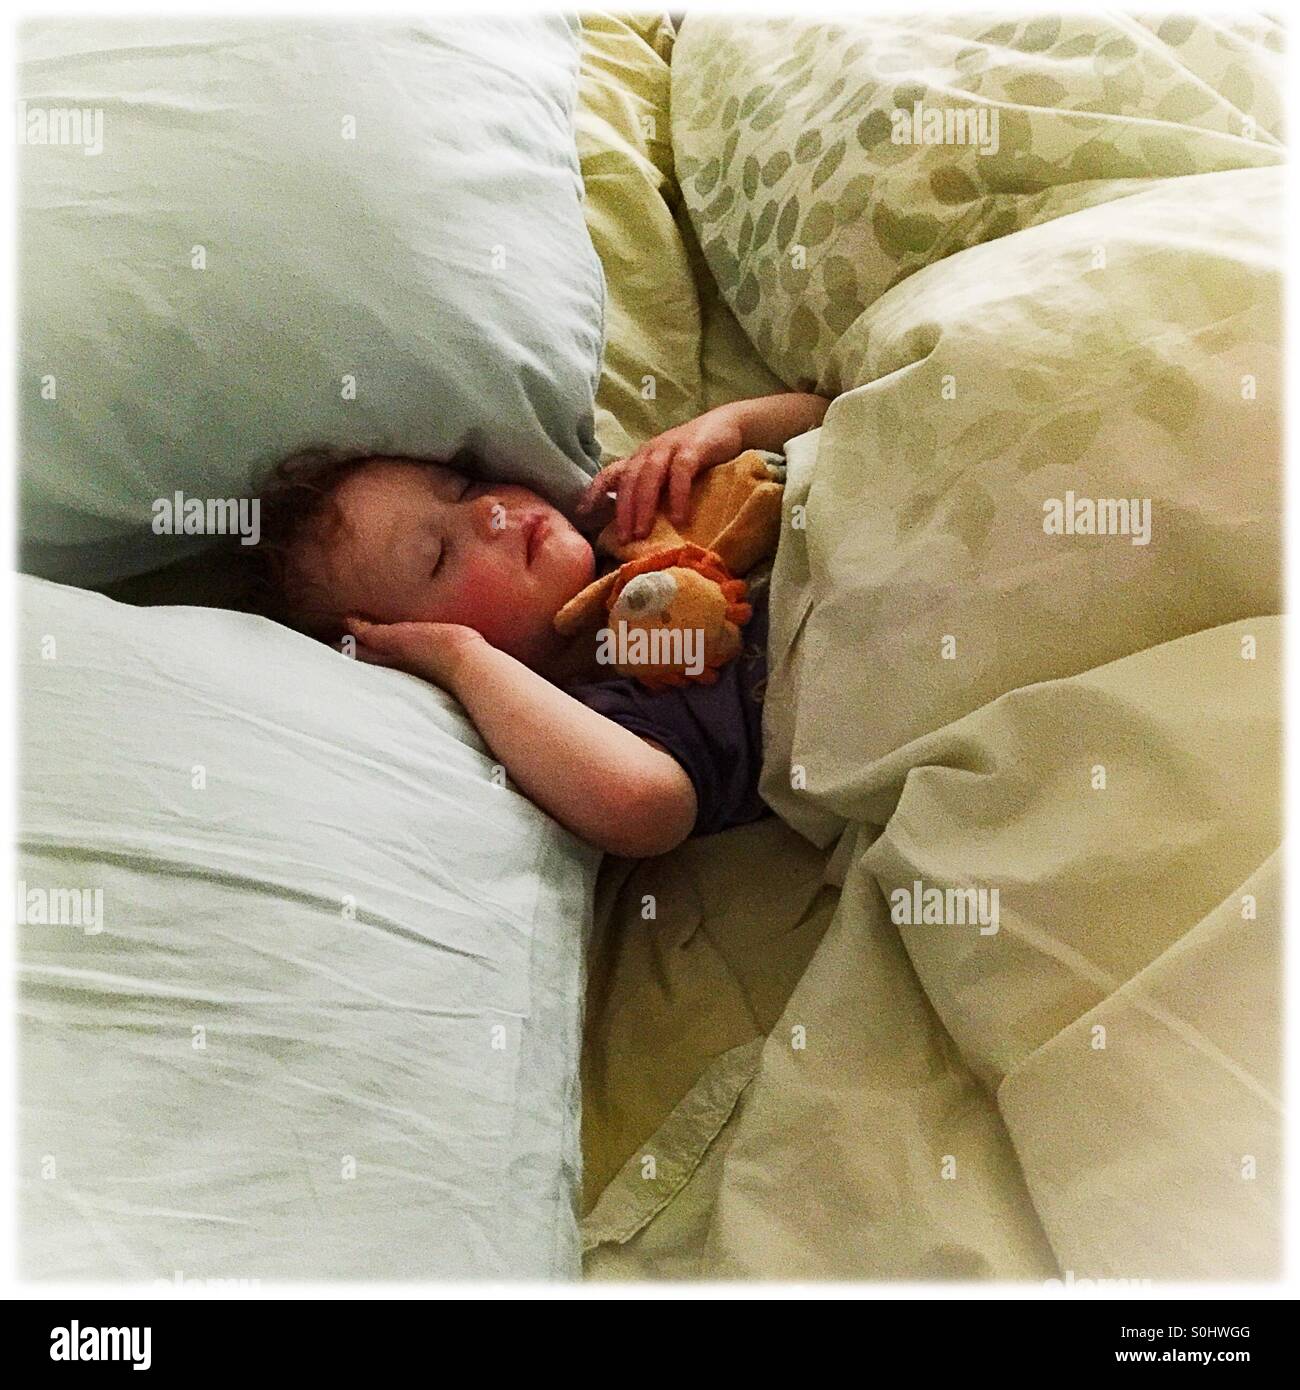 Toddler sleeping in a big bed Stock Photo